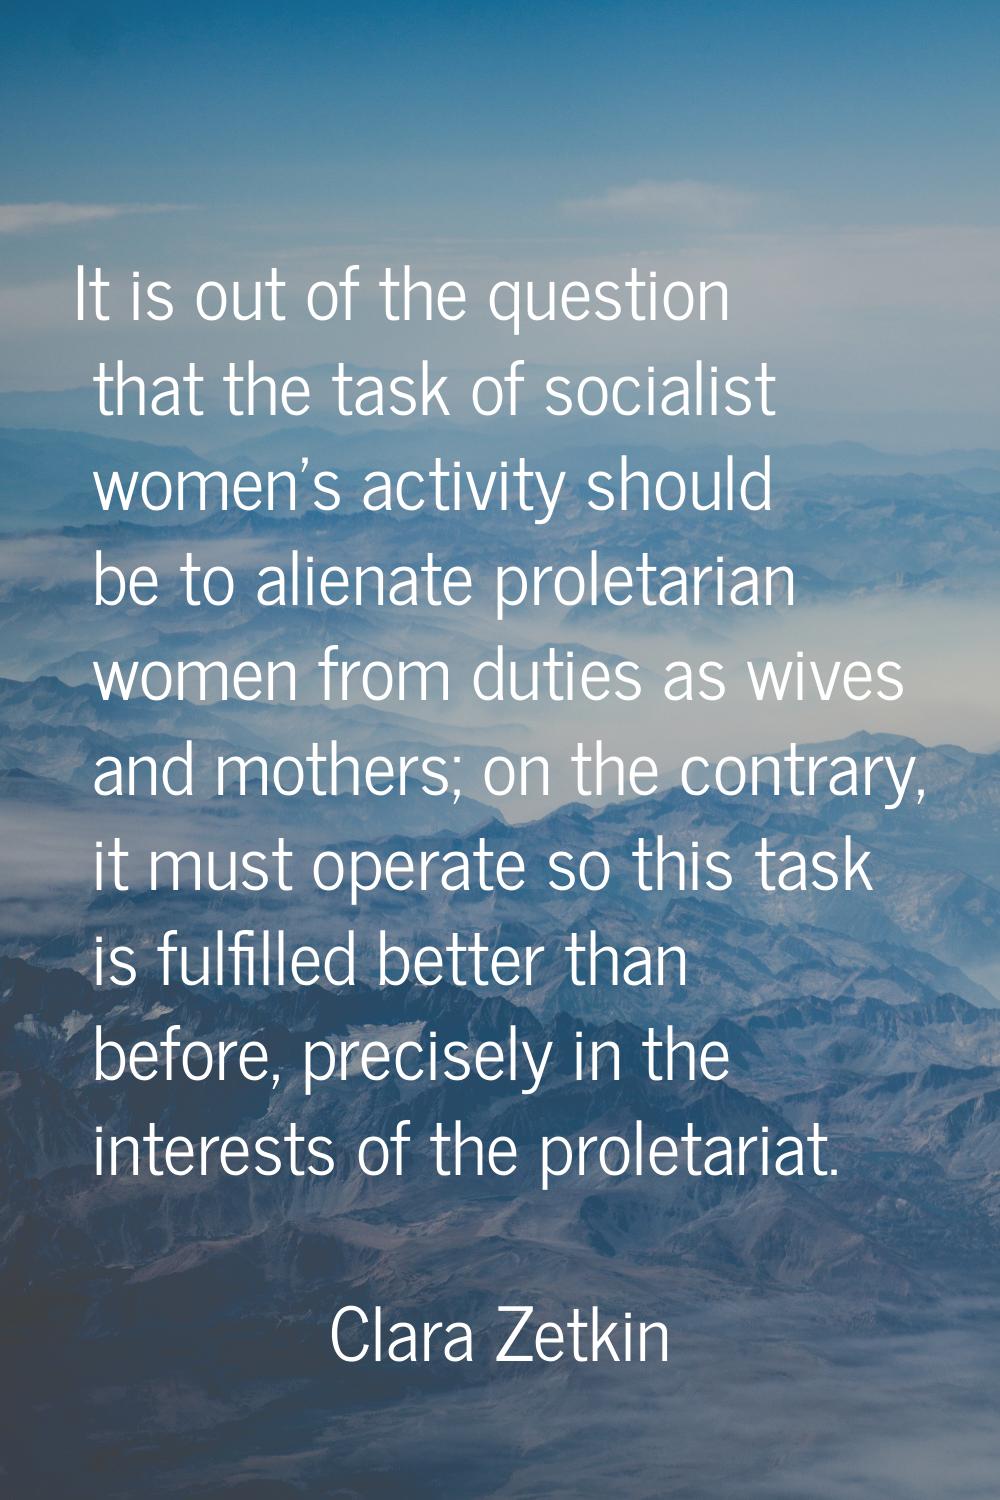 It is out of the question that the task of socialist women's activity should be to alienate proleta